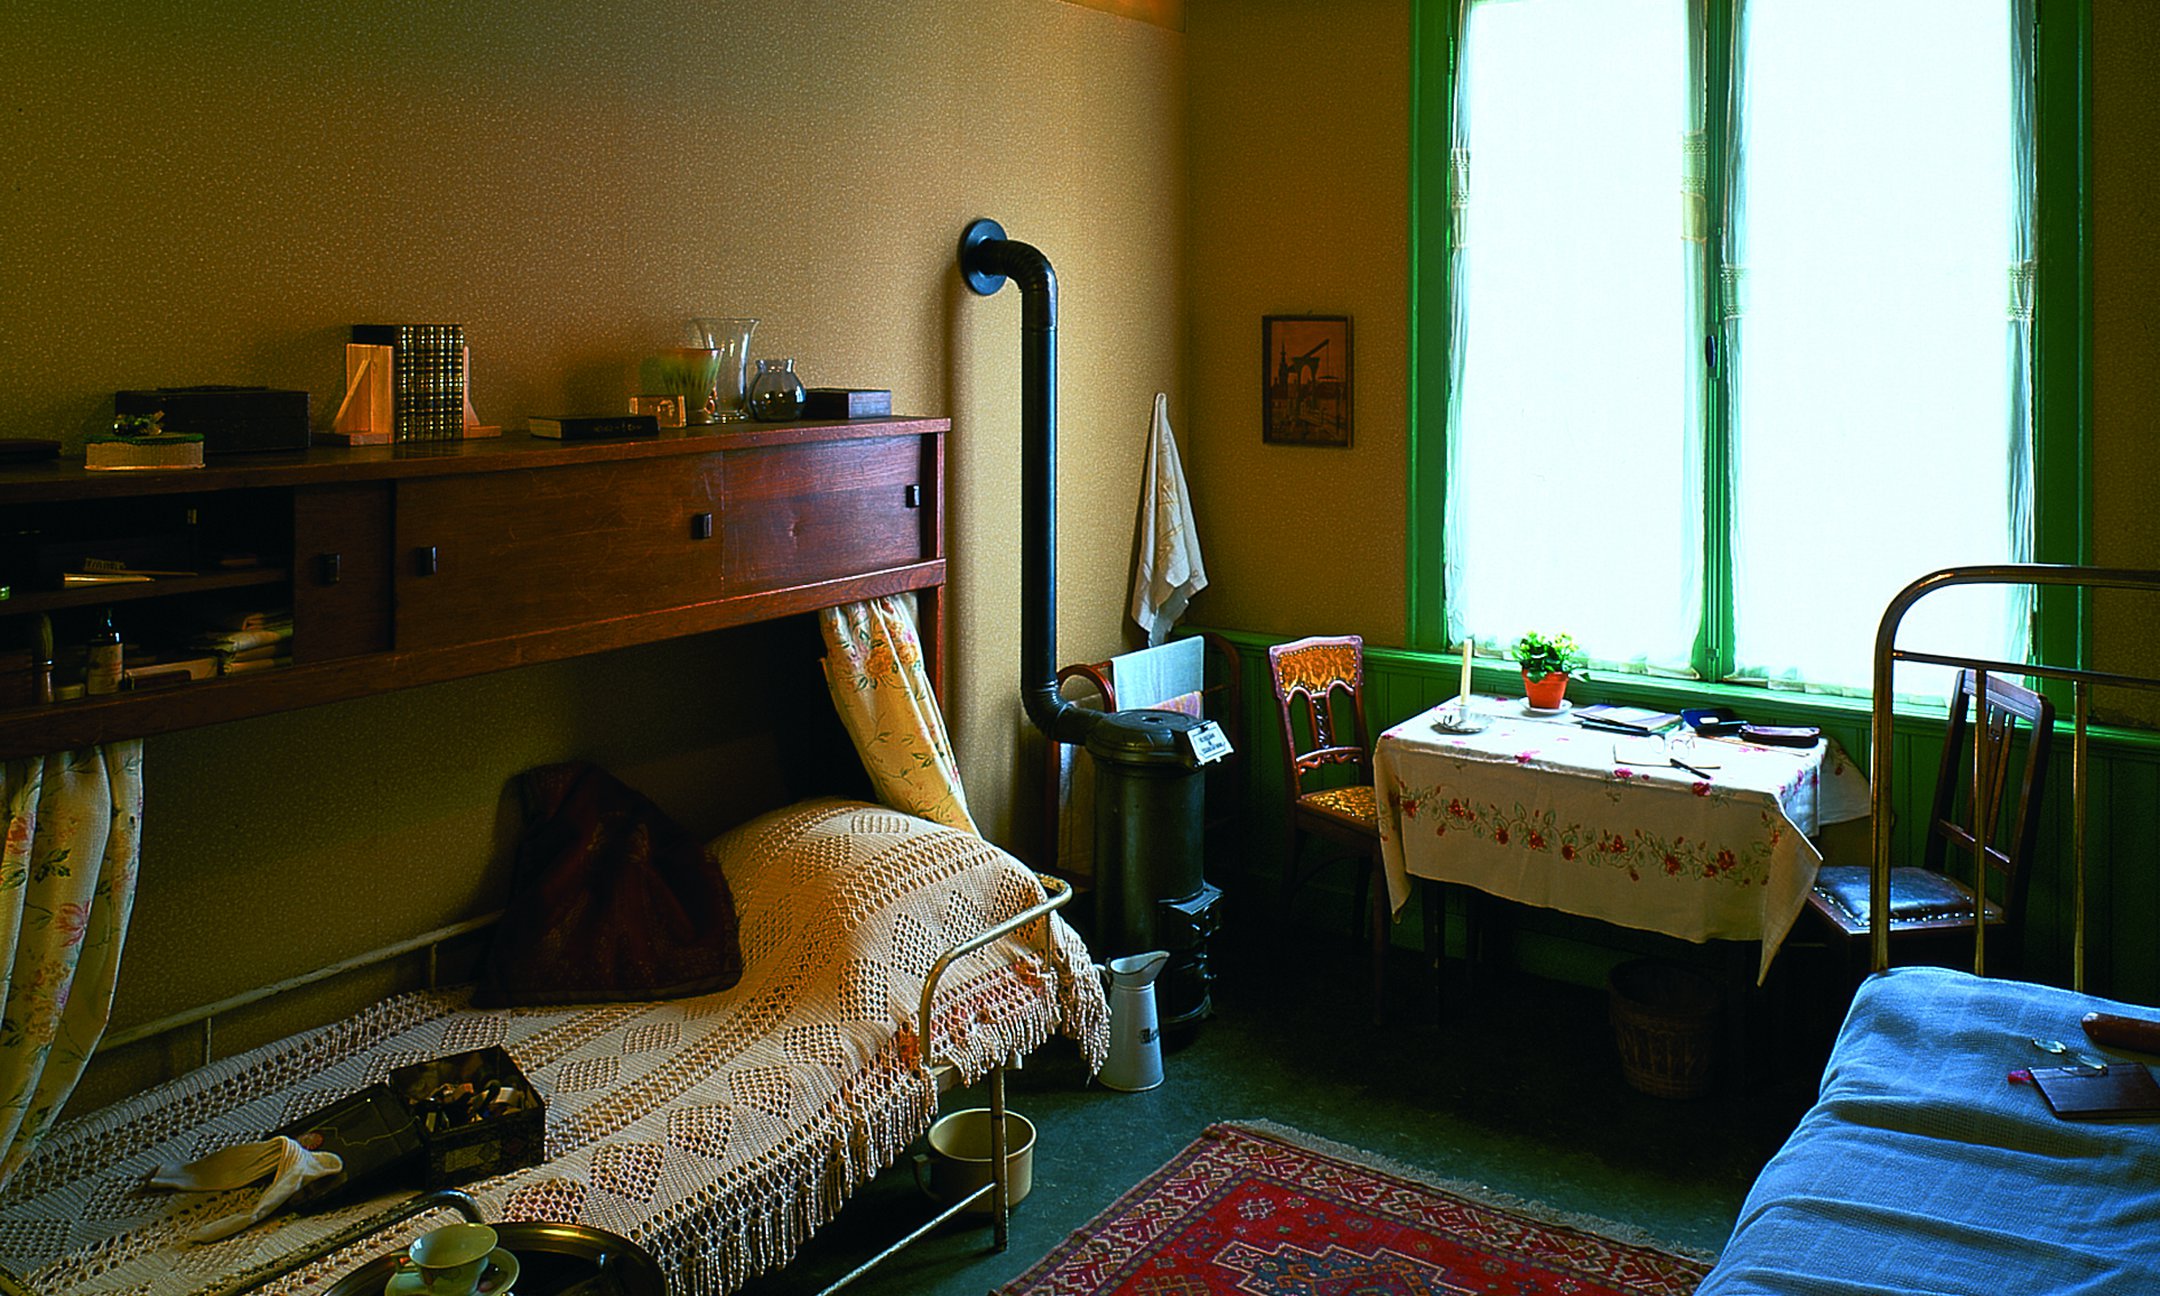 The room of Otto, Edith and Margot Frank, reconstruction (1999).